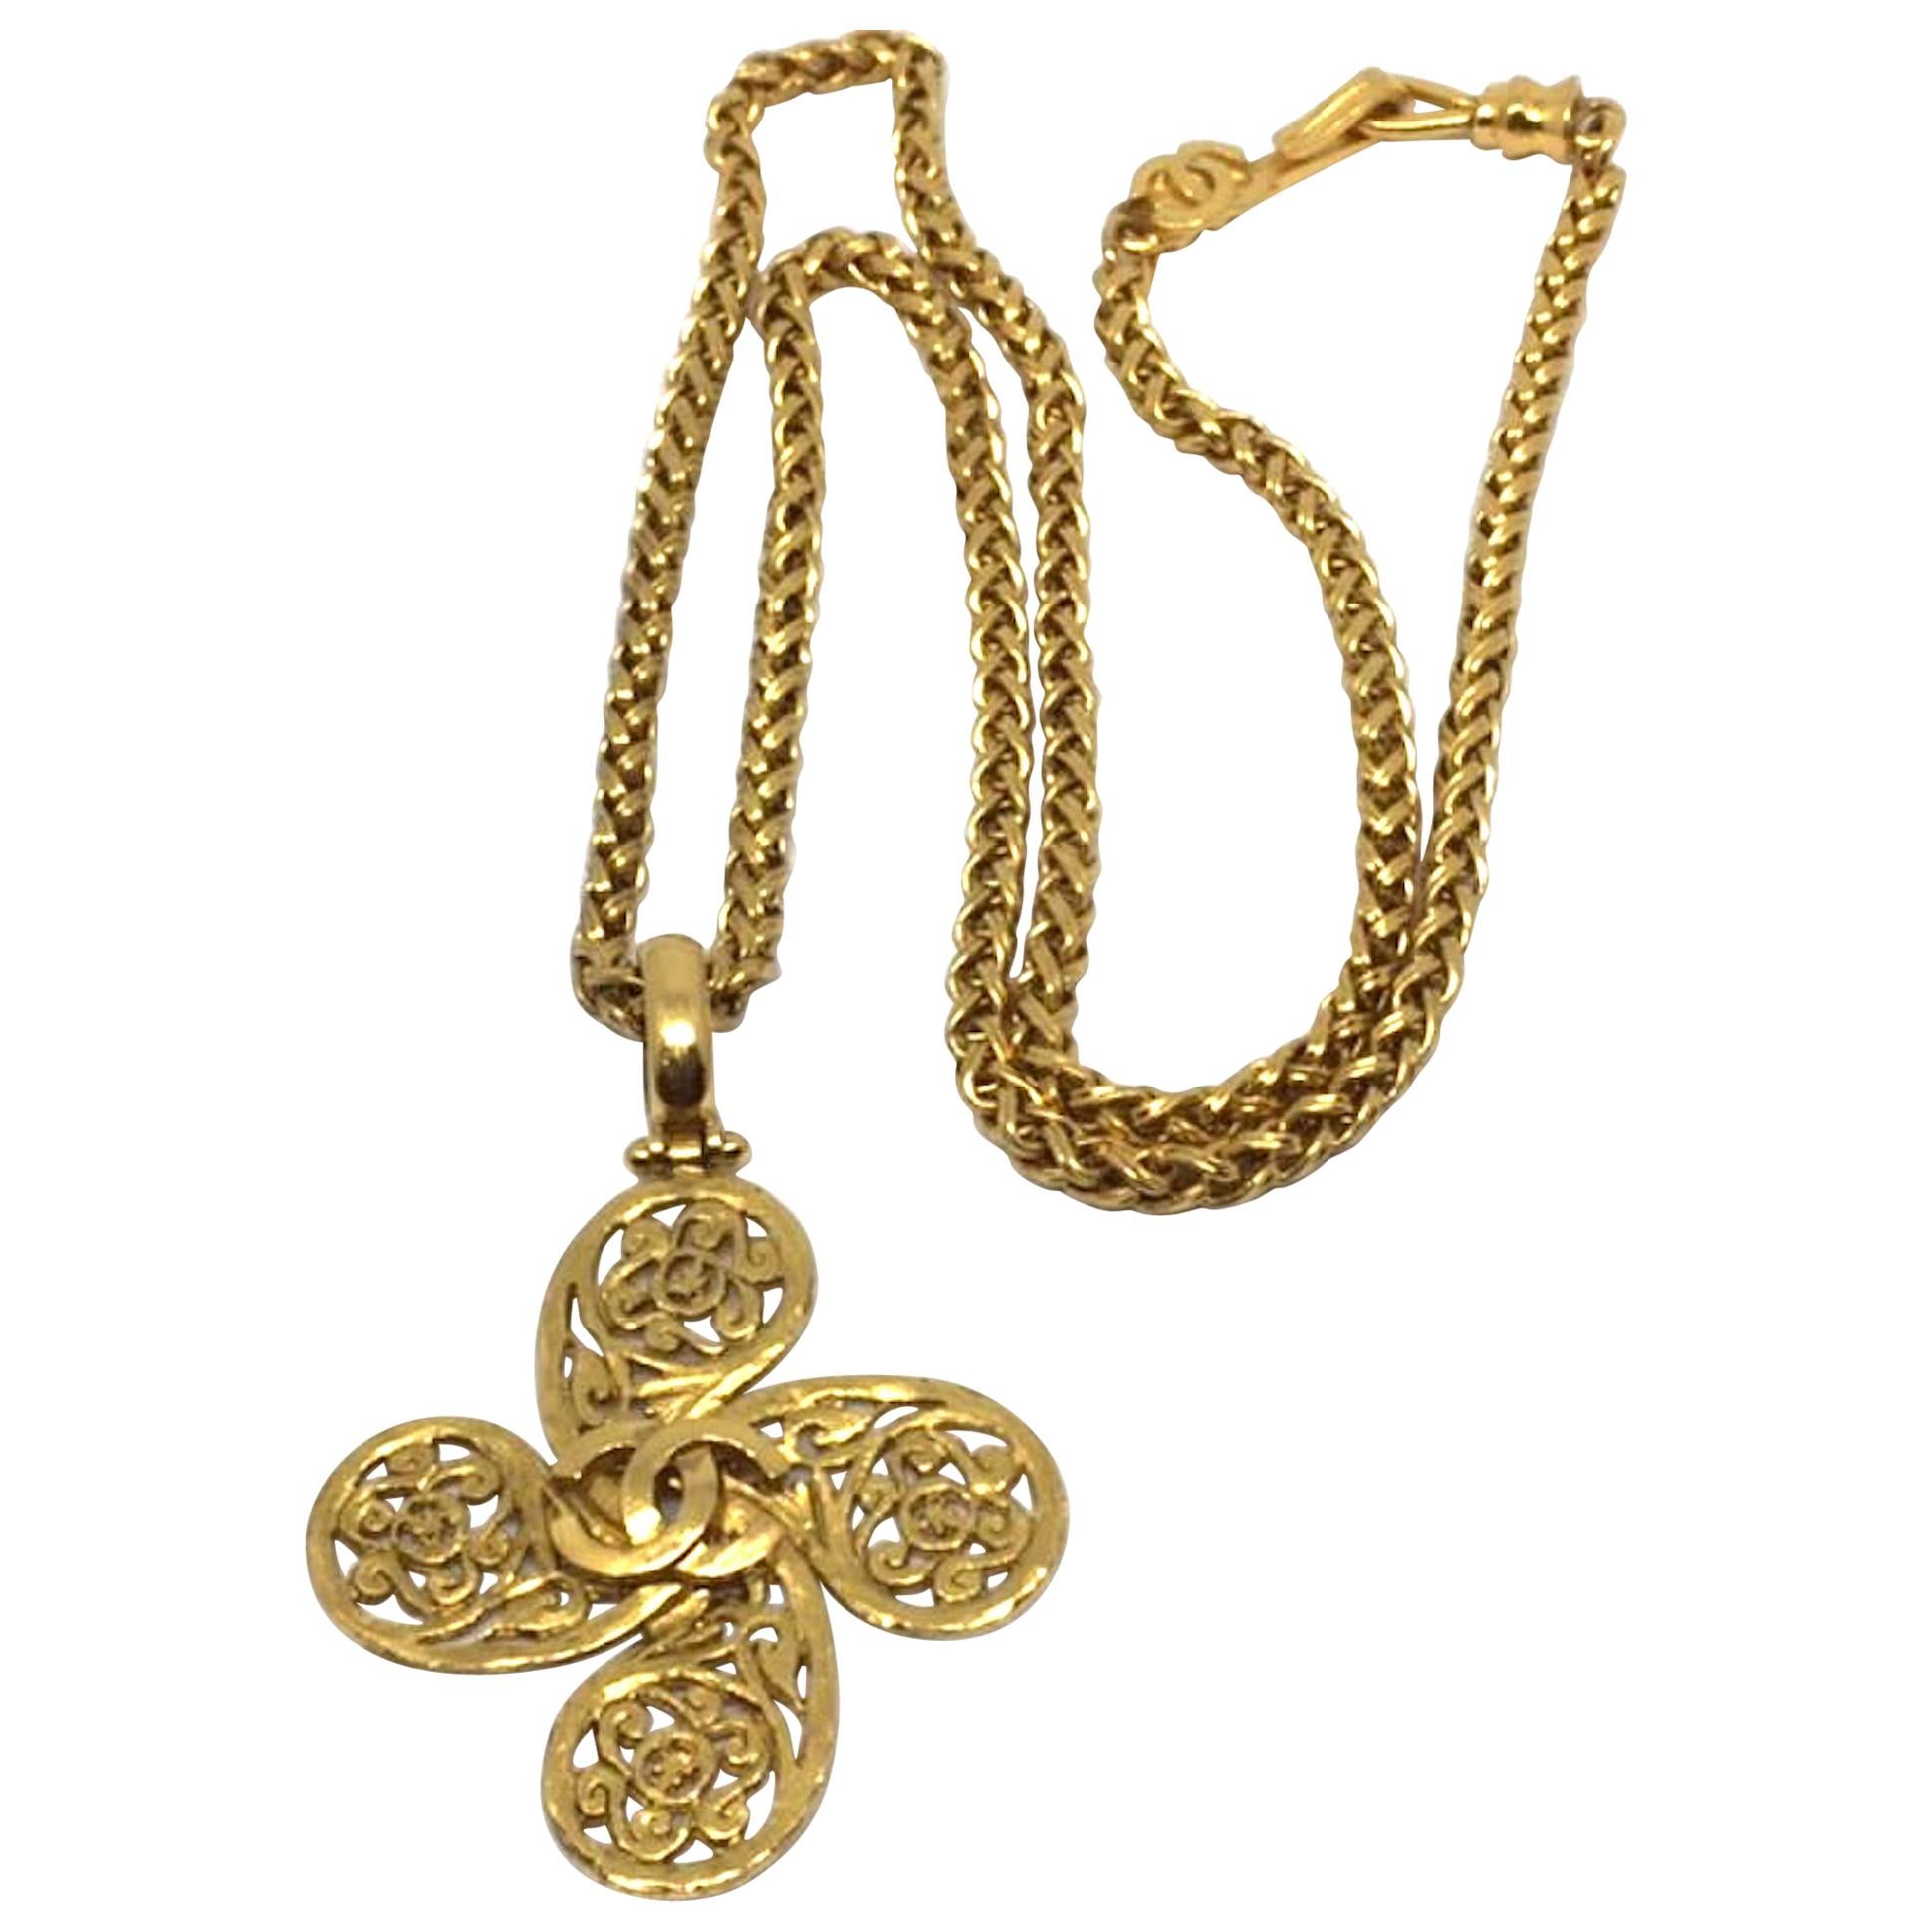 Chanel Pendant Necklace from the Autumn 1995 Collection